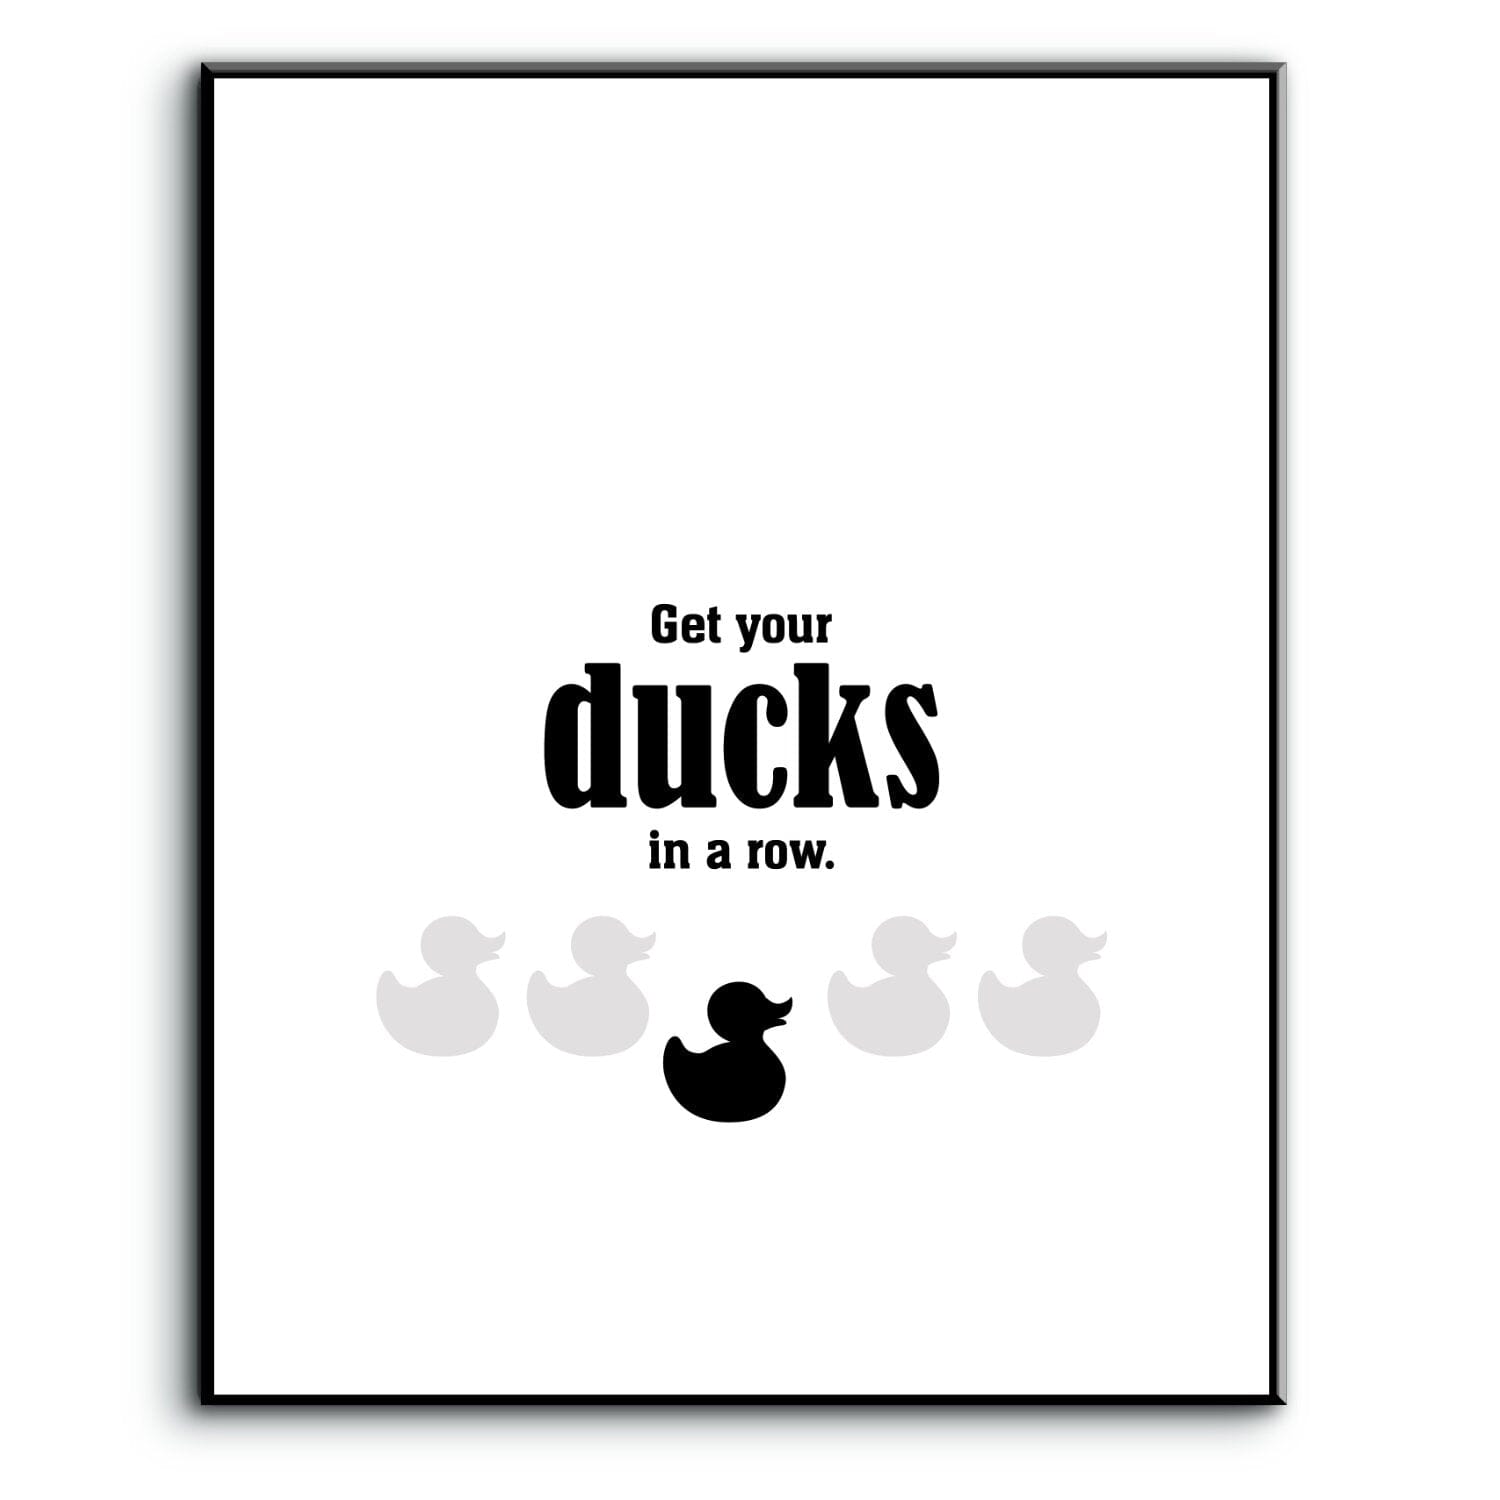 Wise and Witty Sarcastic Print - Get Your Ducks in a Row Wise and Wiseass Quotes Song Lyrics Art 8x10 Plaque Mount 